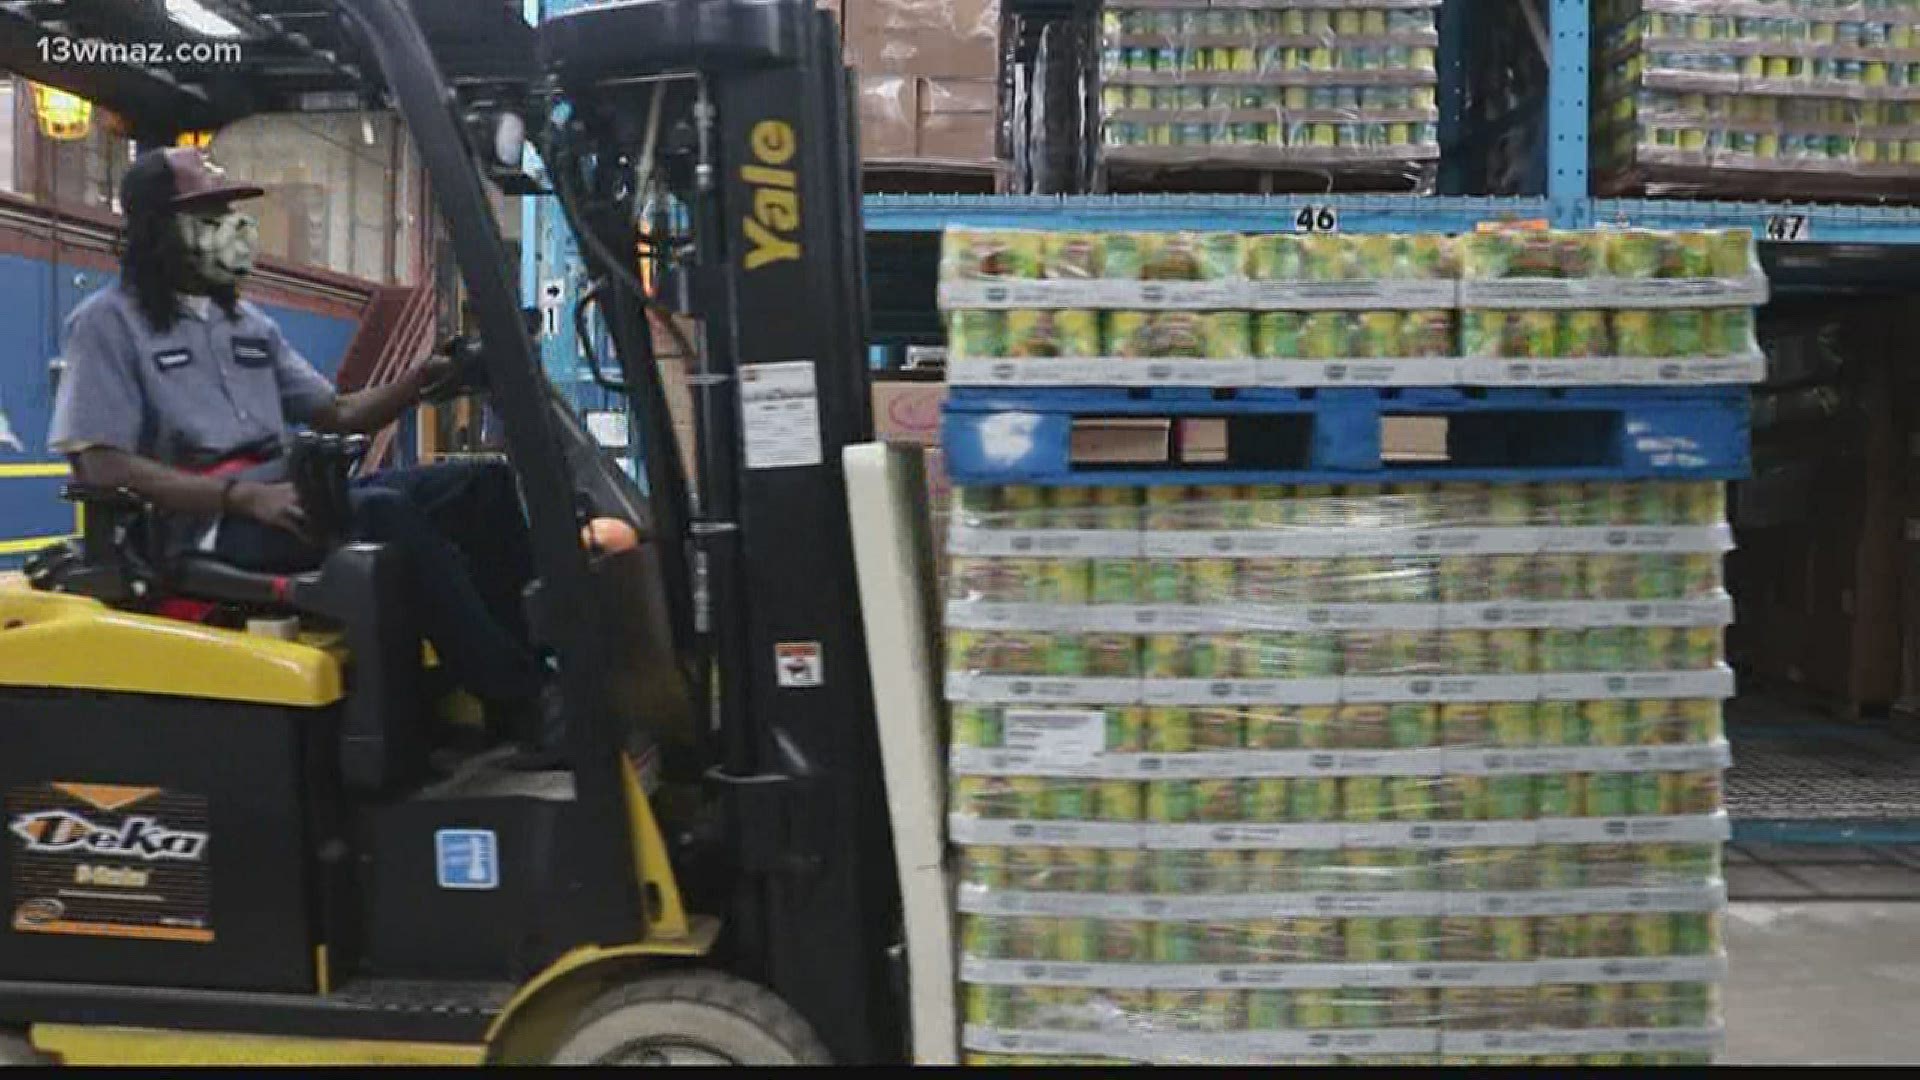 The grocery store chain delivered over 15,000 pounds of non-perishable food to the bank's warehouse.